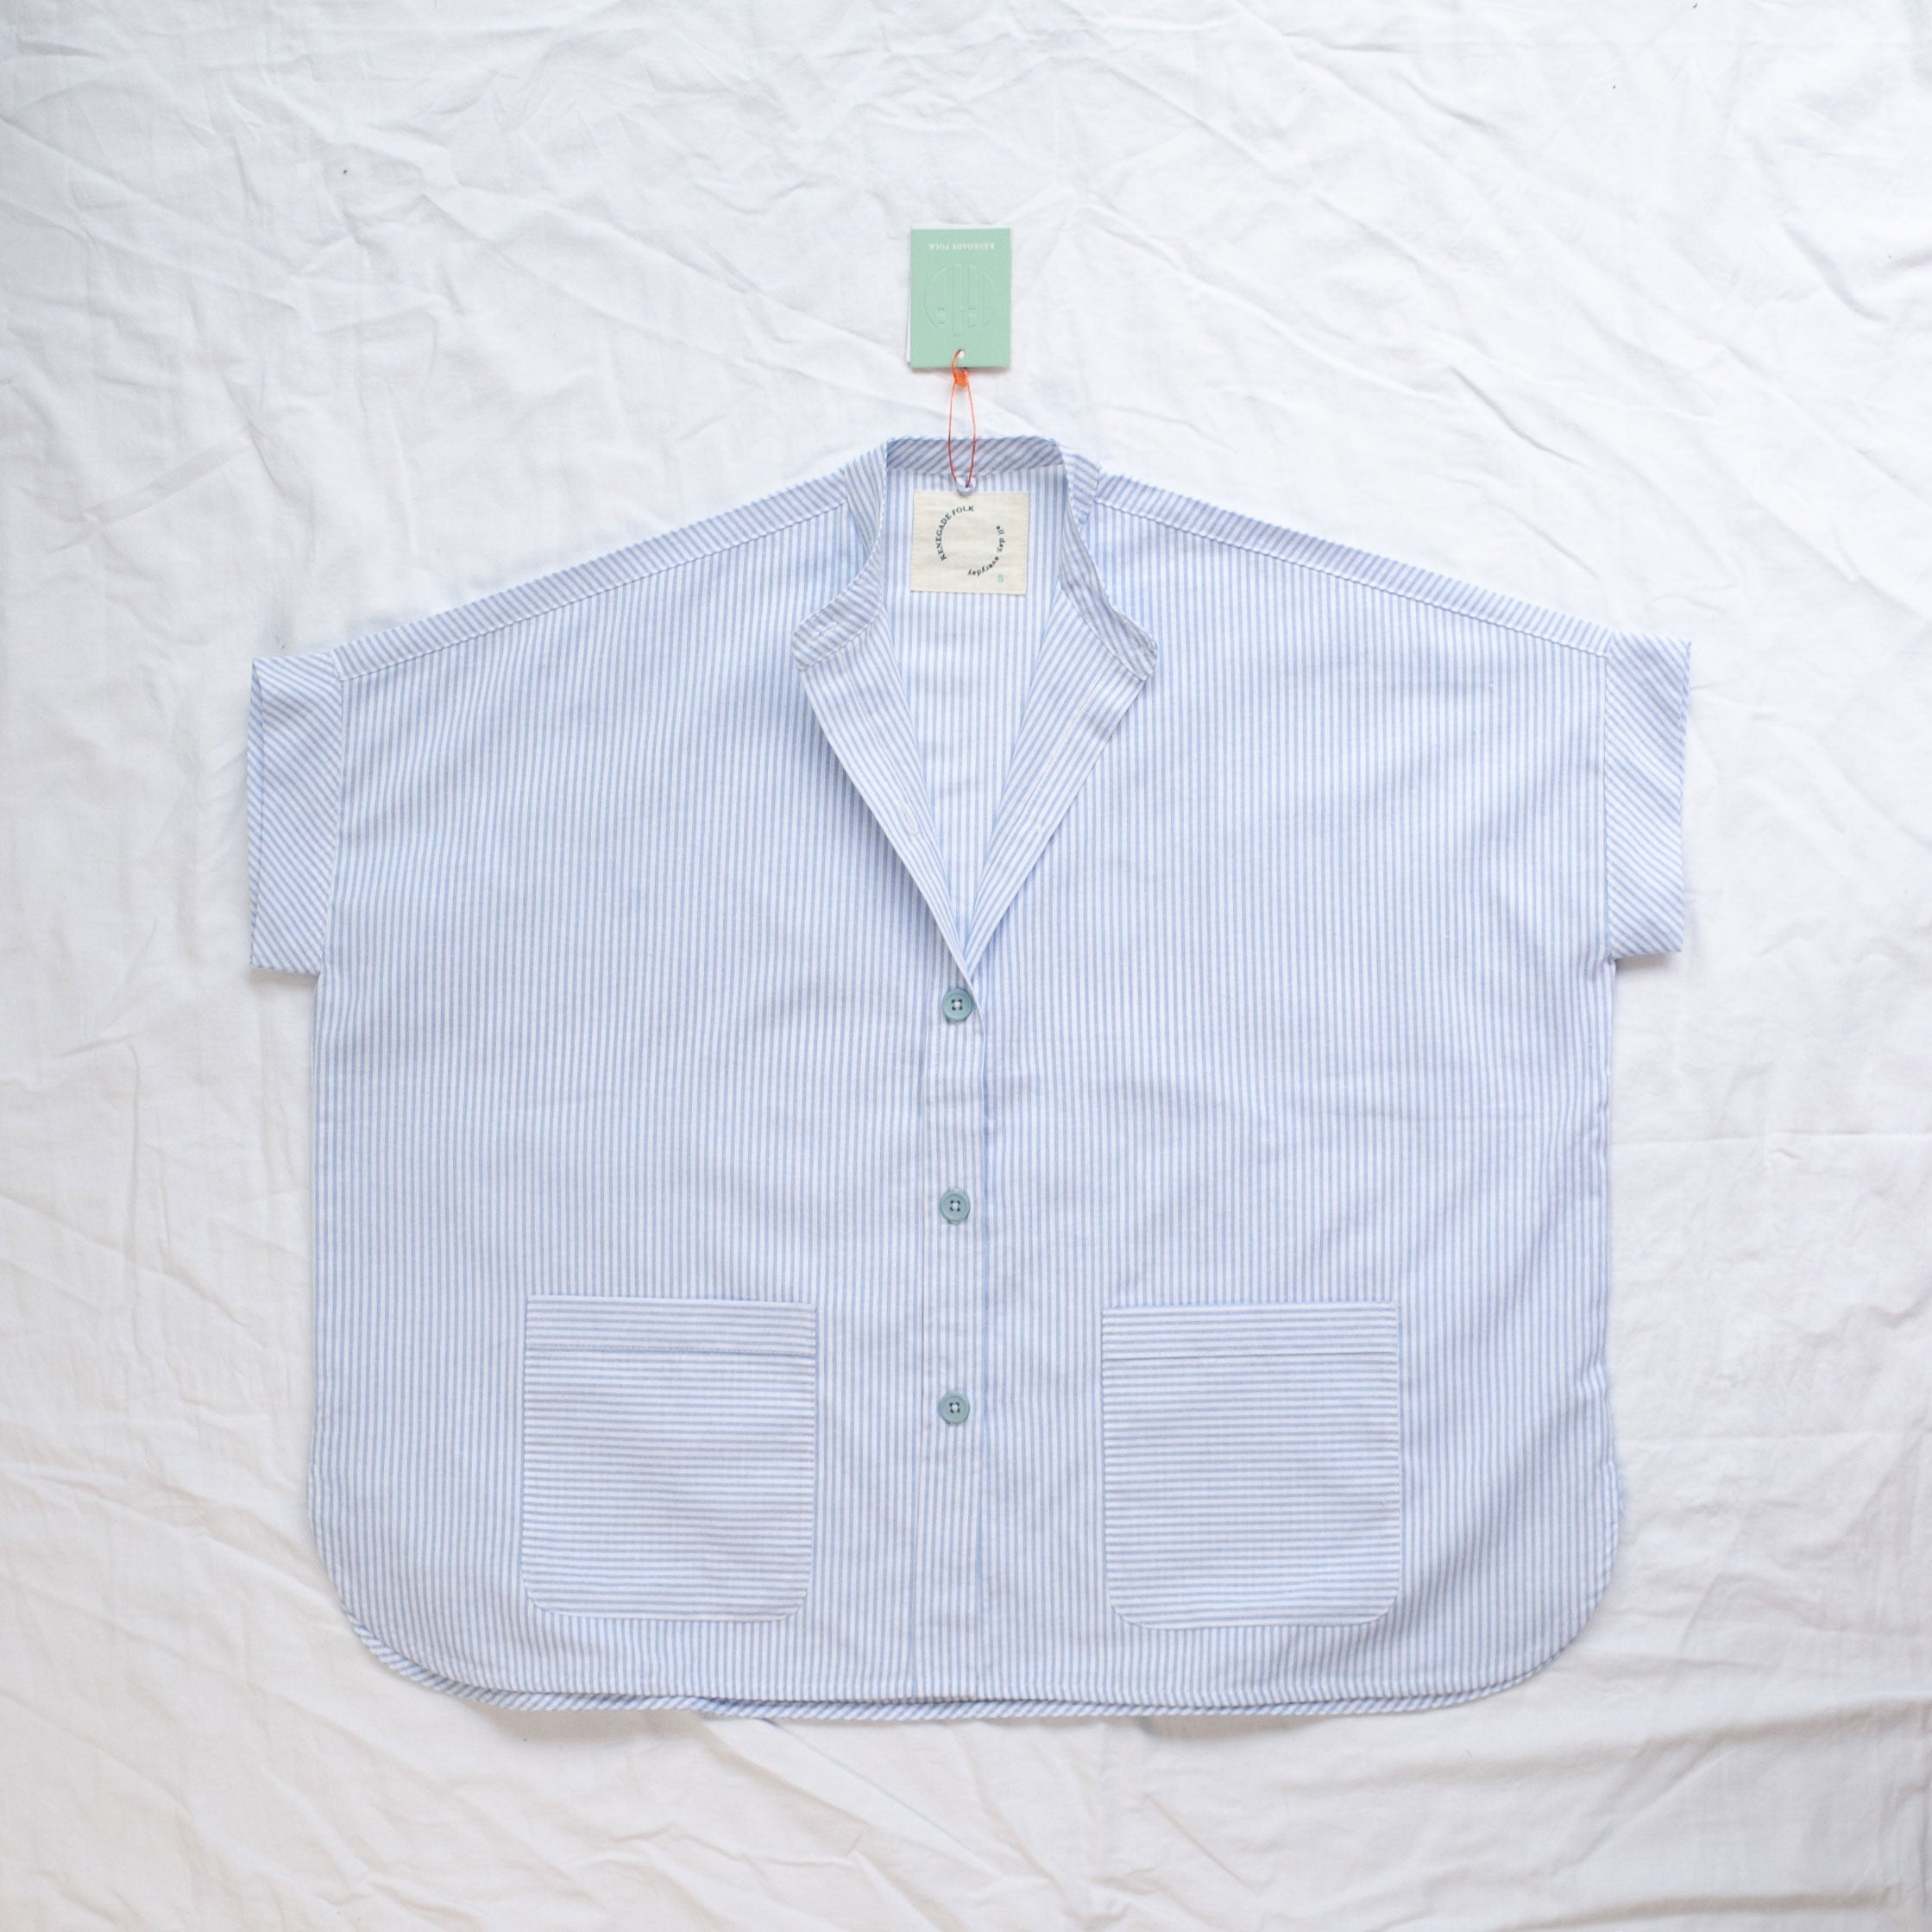 Commons Utility Polo 2.0